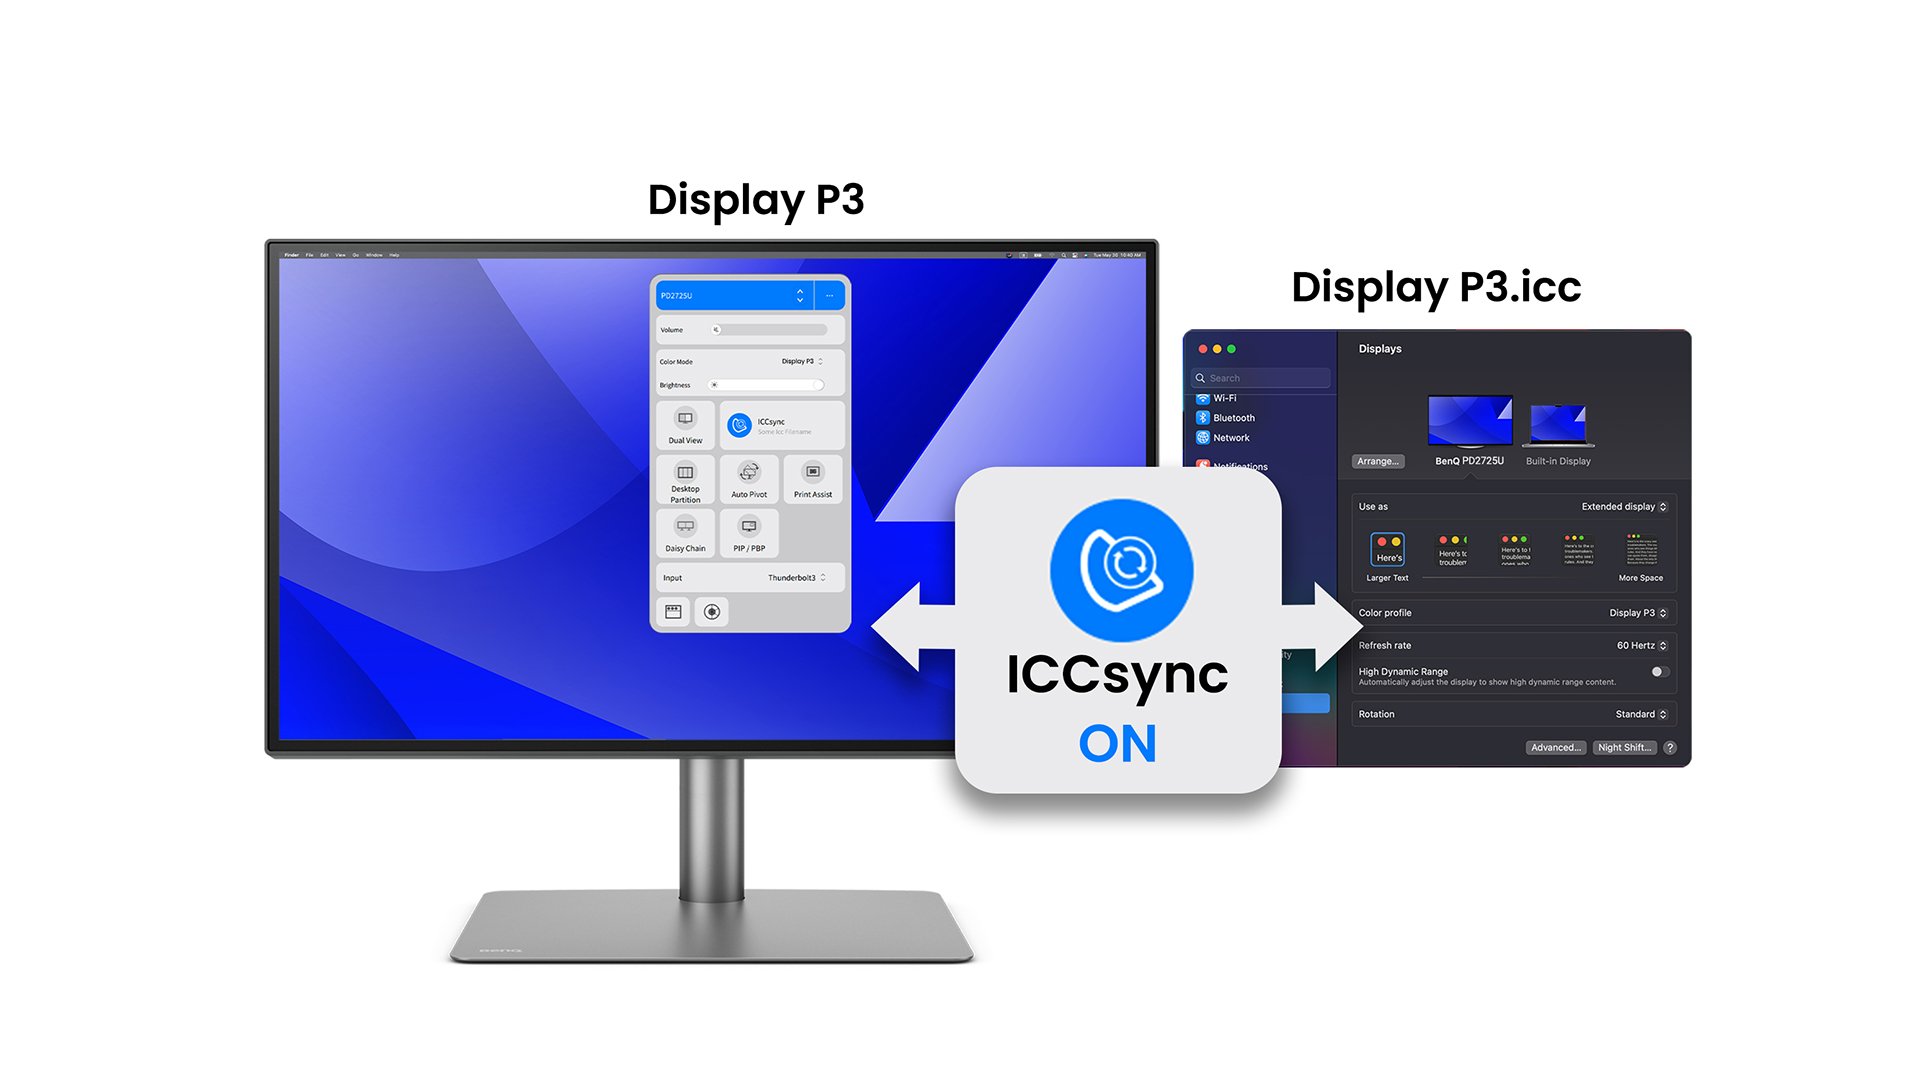 BenQ ICCsync auto-matches and auto-synchronizes ICC profiles on the monitor when you change color modes, and also between your Mac and BenQ monitor.